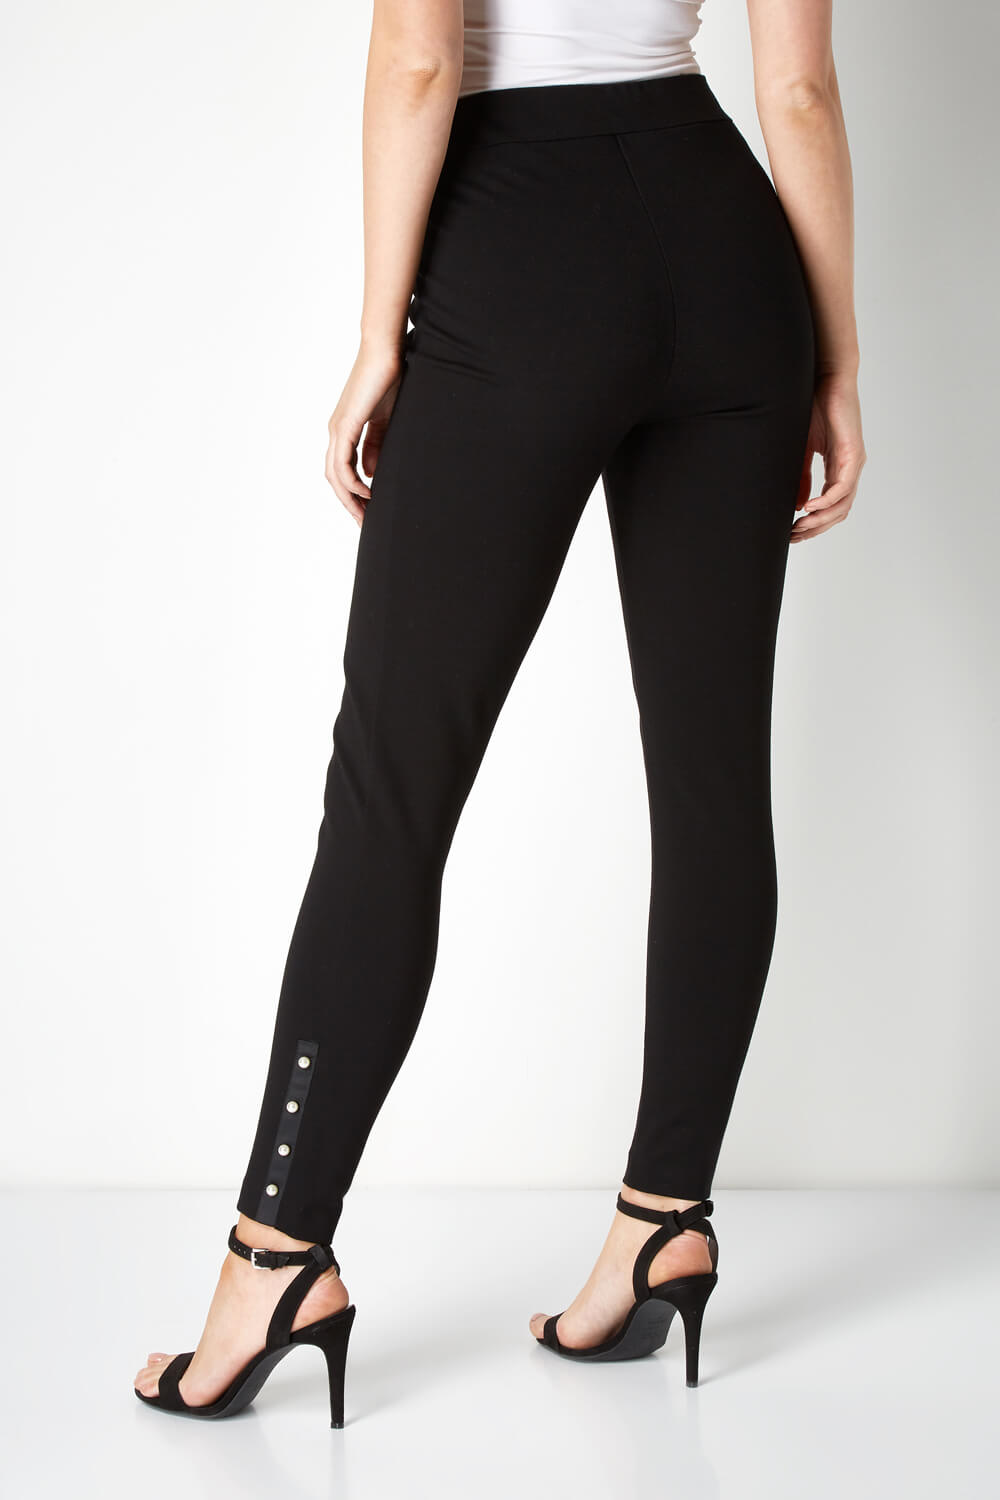 Black Pearl Detail Stretch Trousers, Image 2 of 5